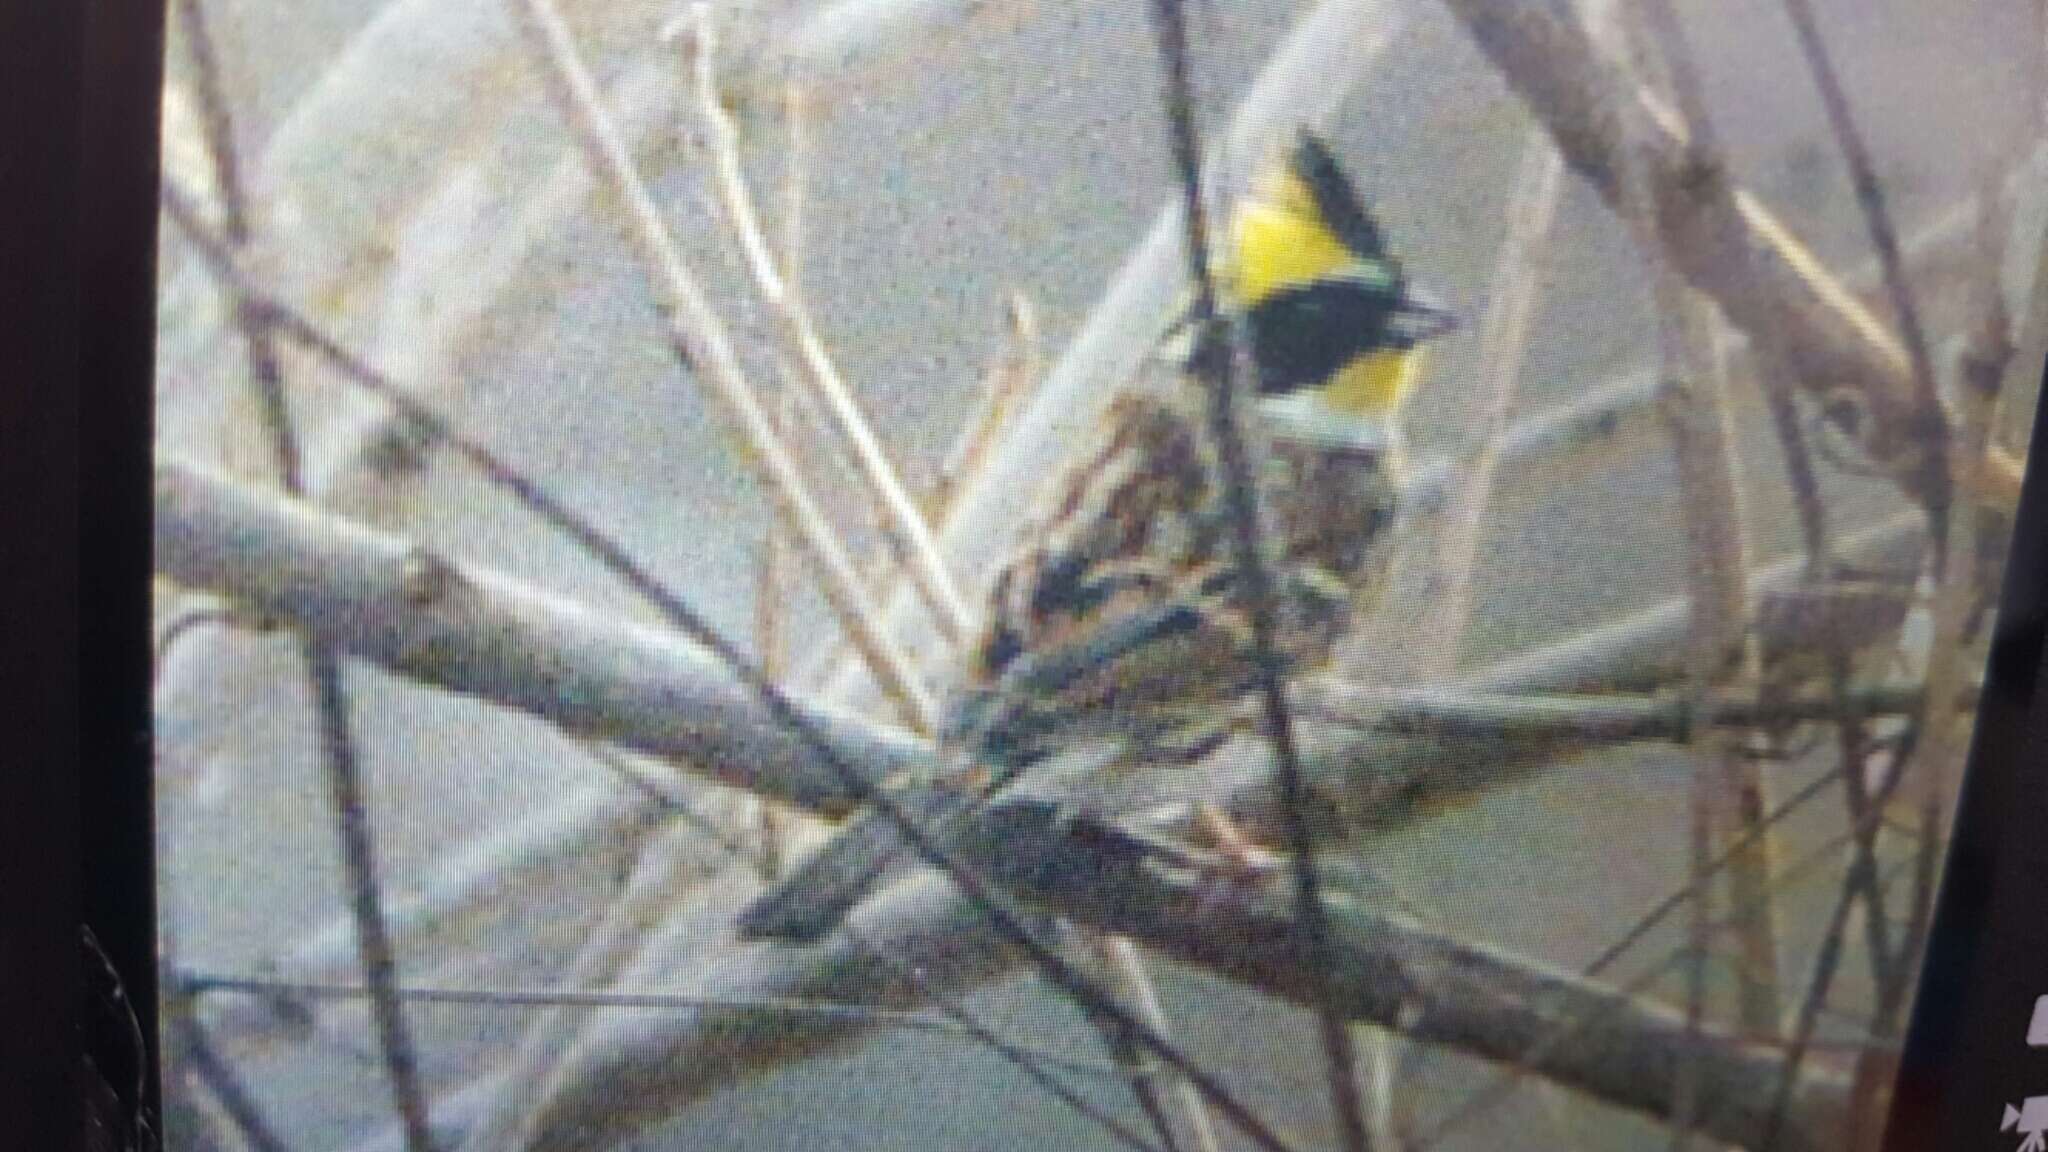 Image of Yellow-throated Bunting